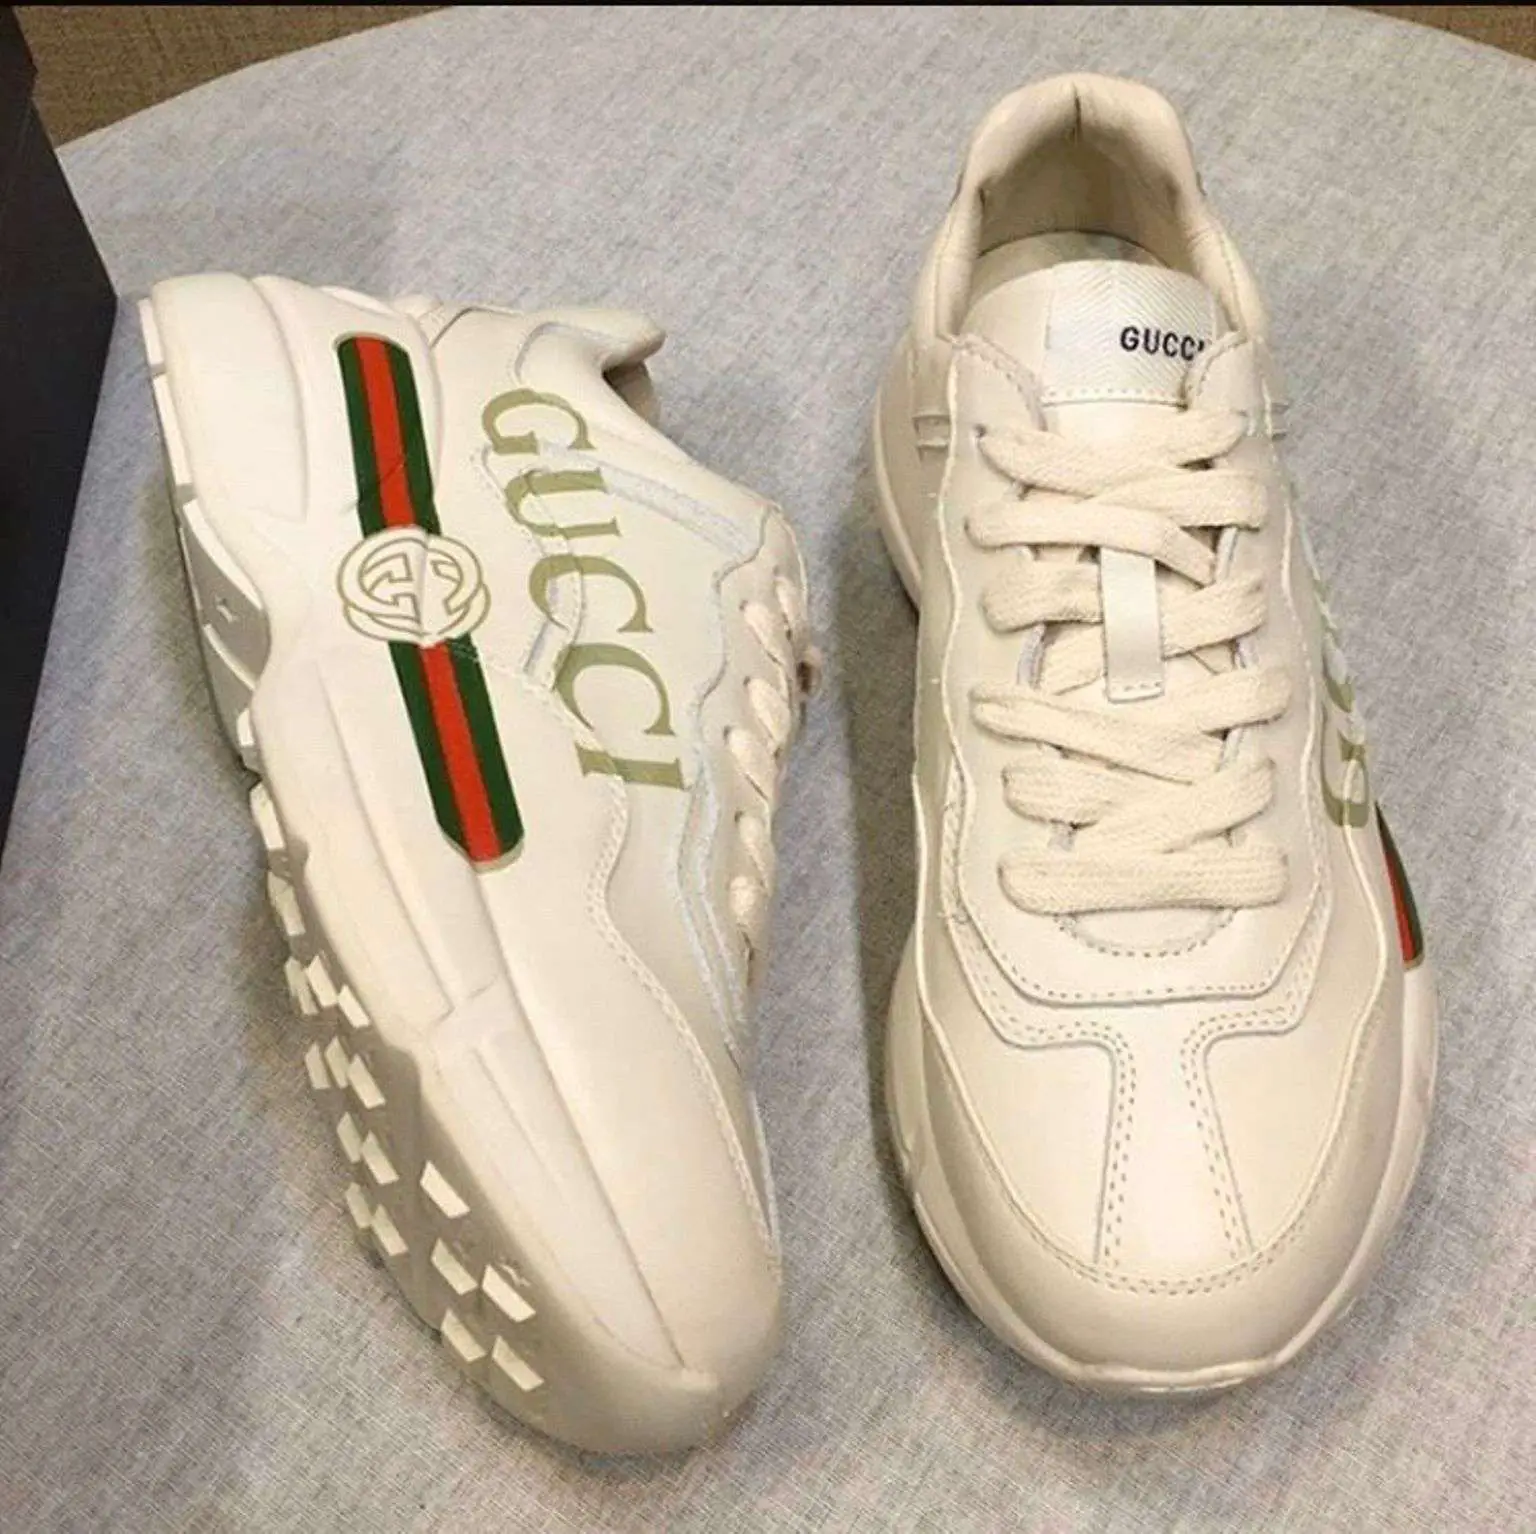 Womens Gucci sneakers in E17 London for £130.00 for sale ...